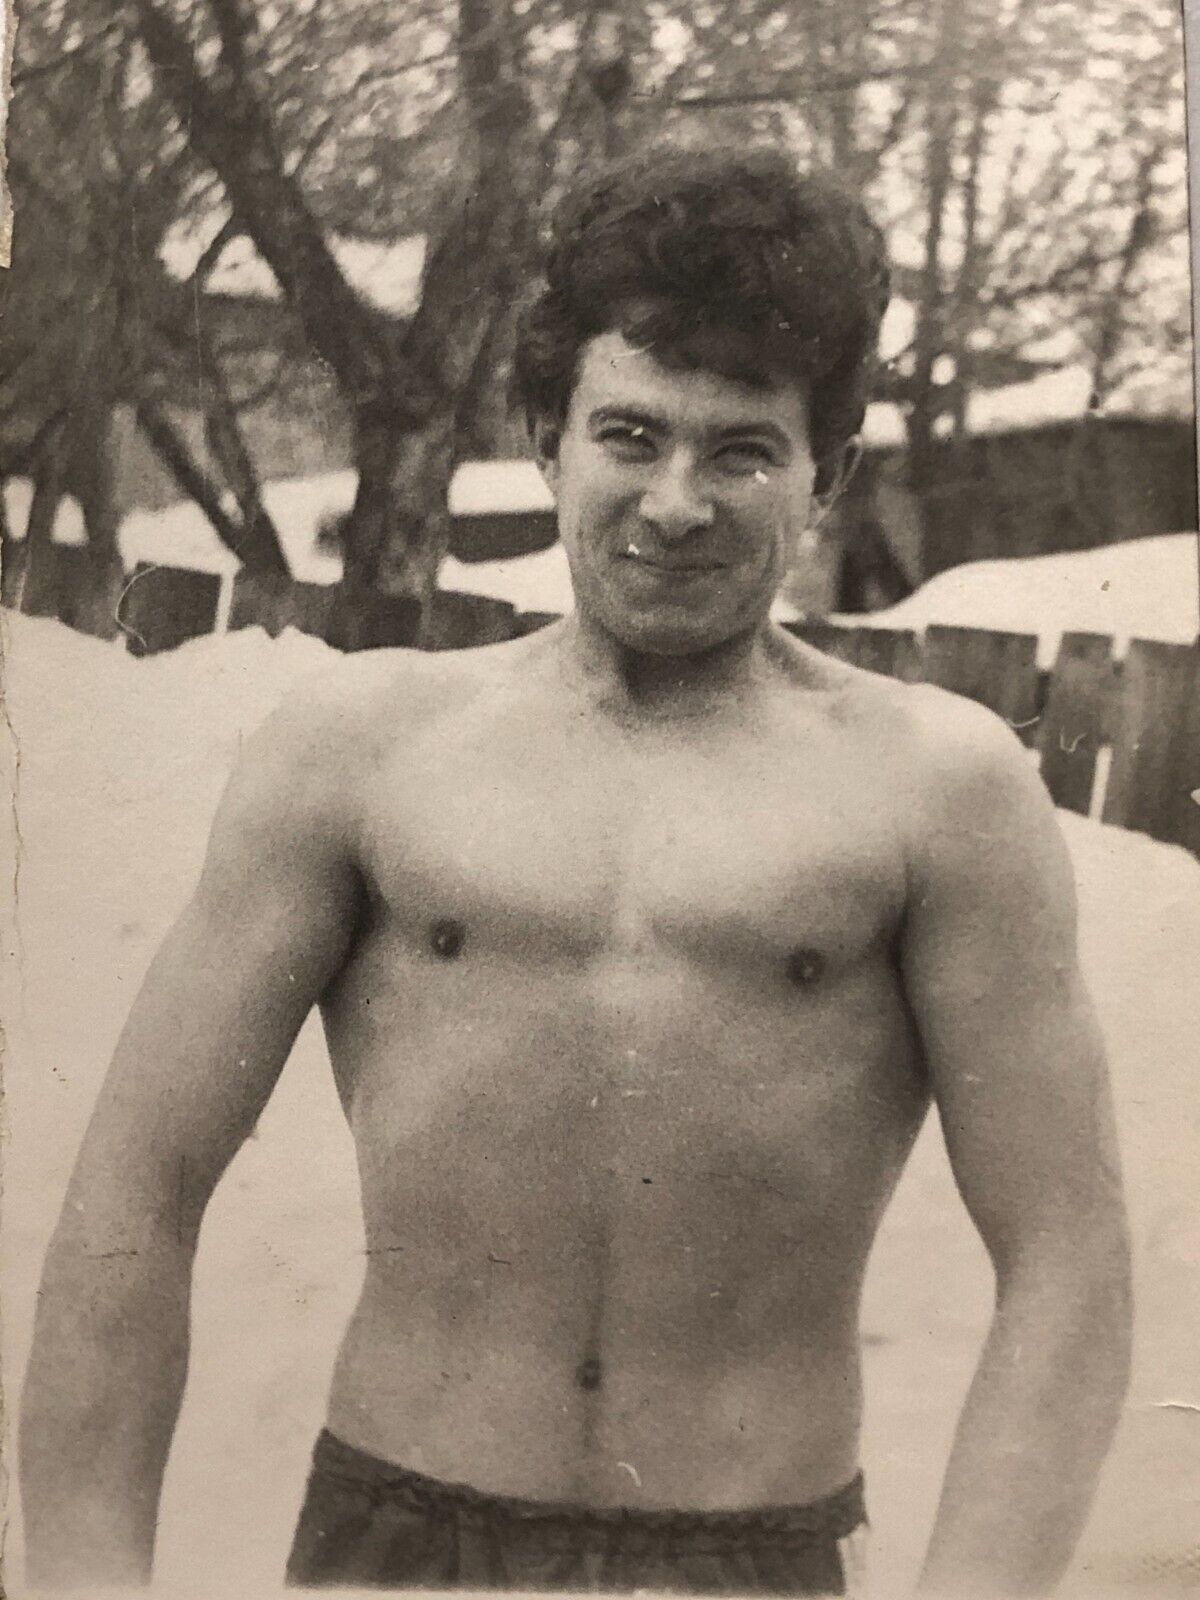 1970s Shirtless Man Happy Face Curly Guy Bodybuilder Gay int Vintage Photo